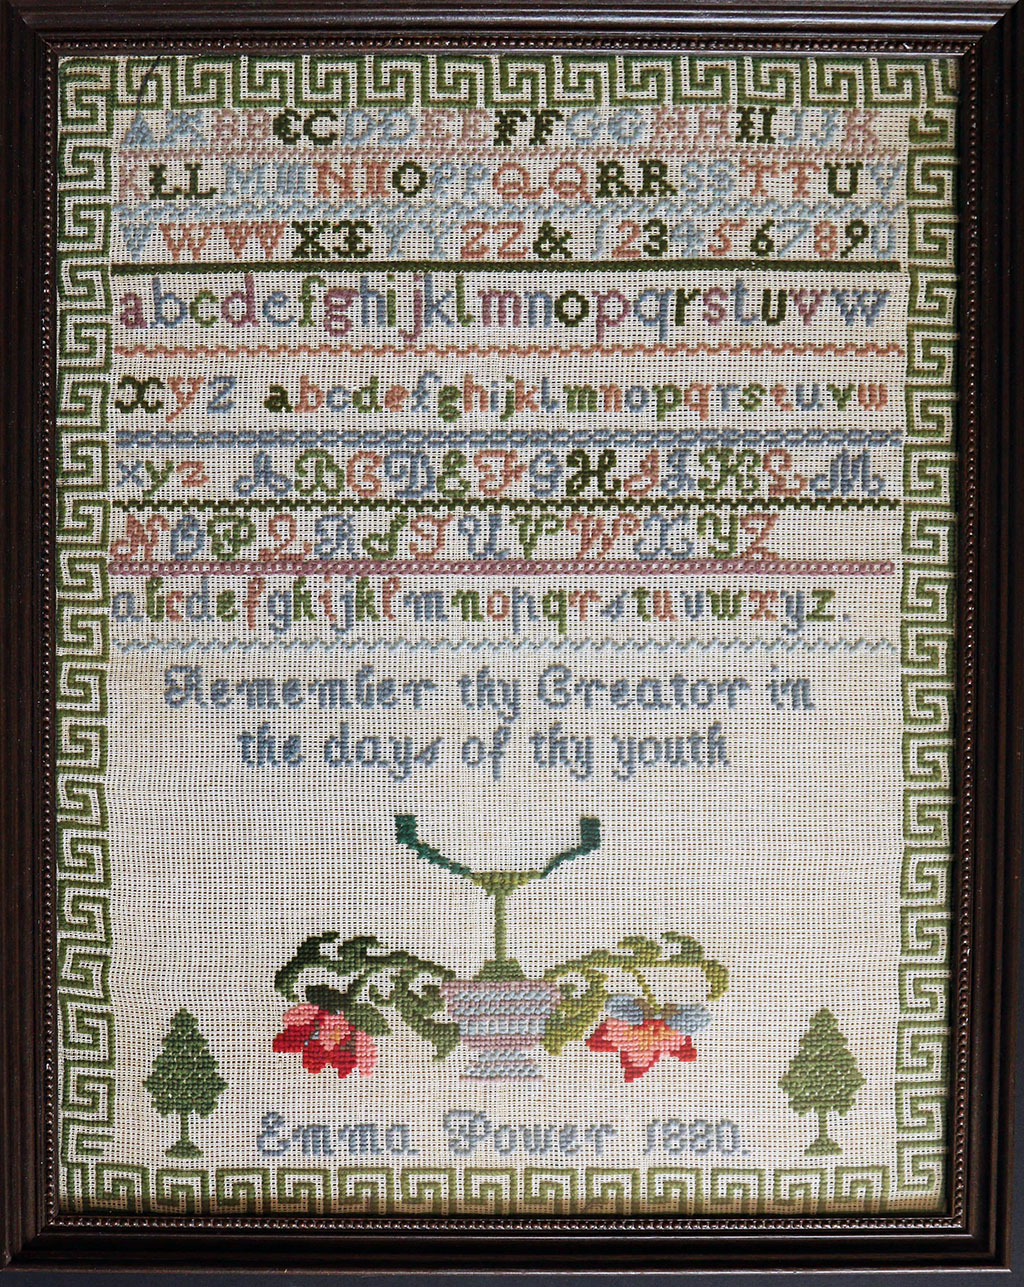 Example of cross stitch showing the letters of the alphabet and a sentence saying Remember they Creator in the days of thy youth. The name Emma Power and date 1880 is shown.